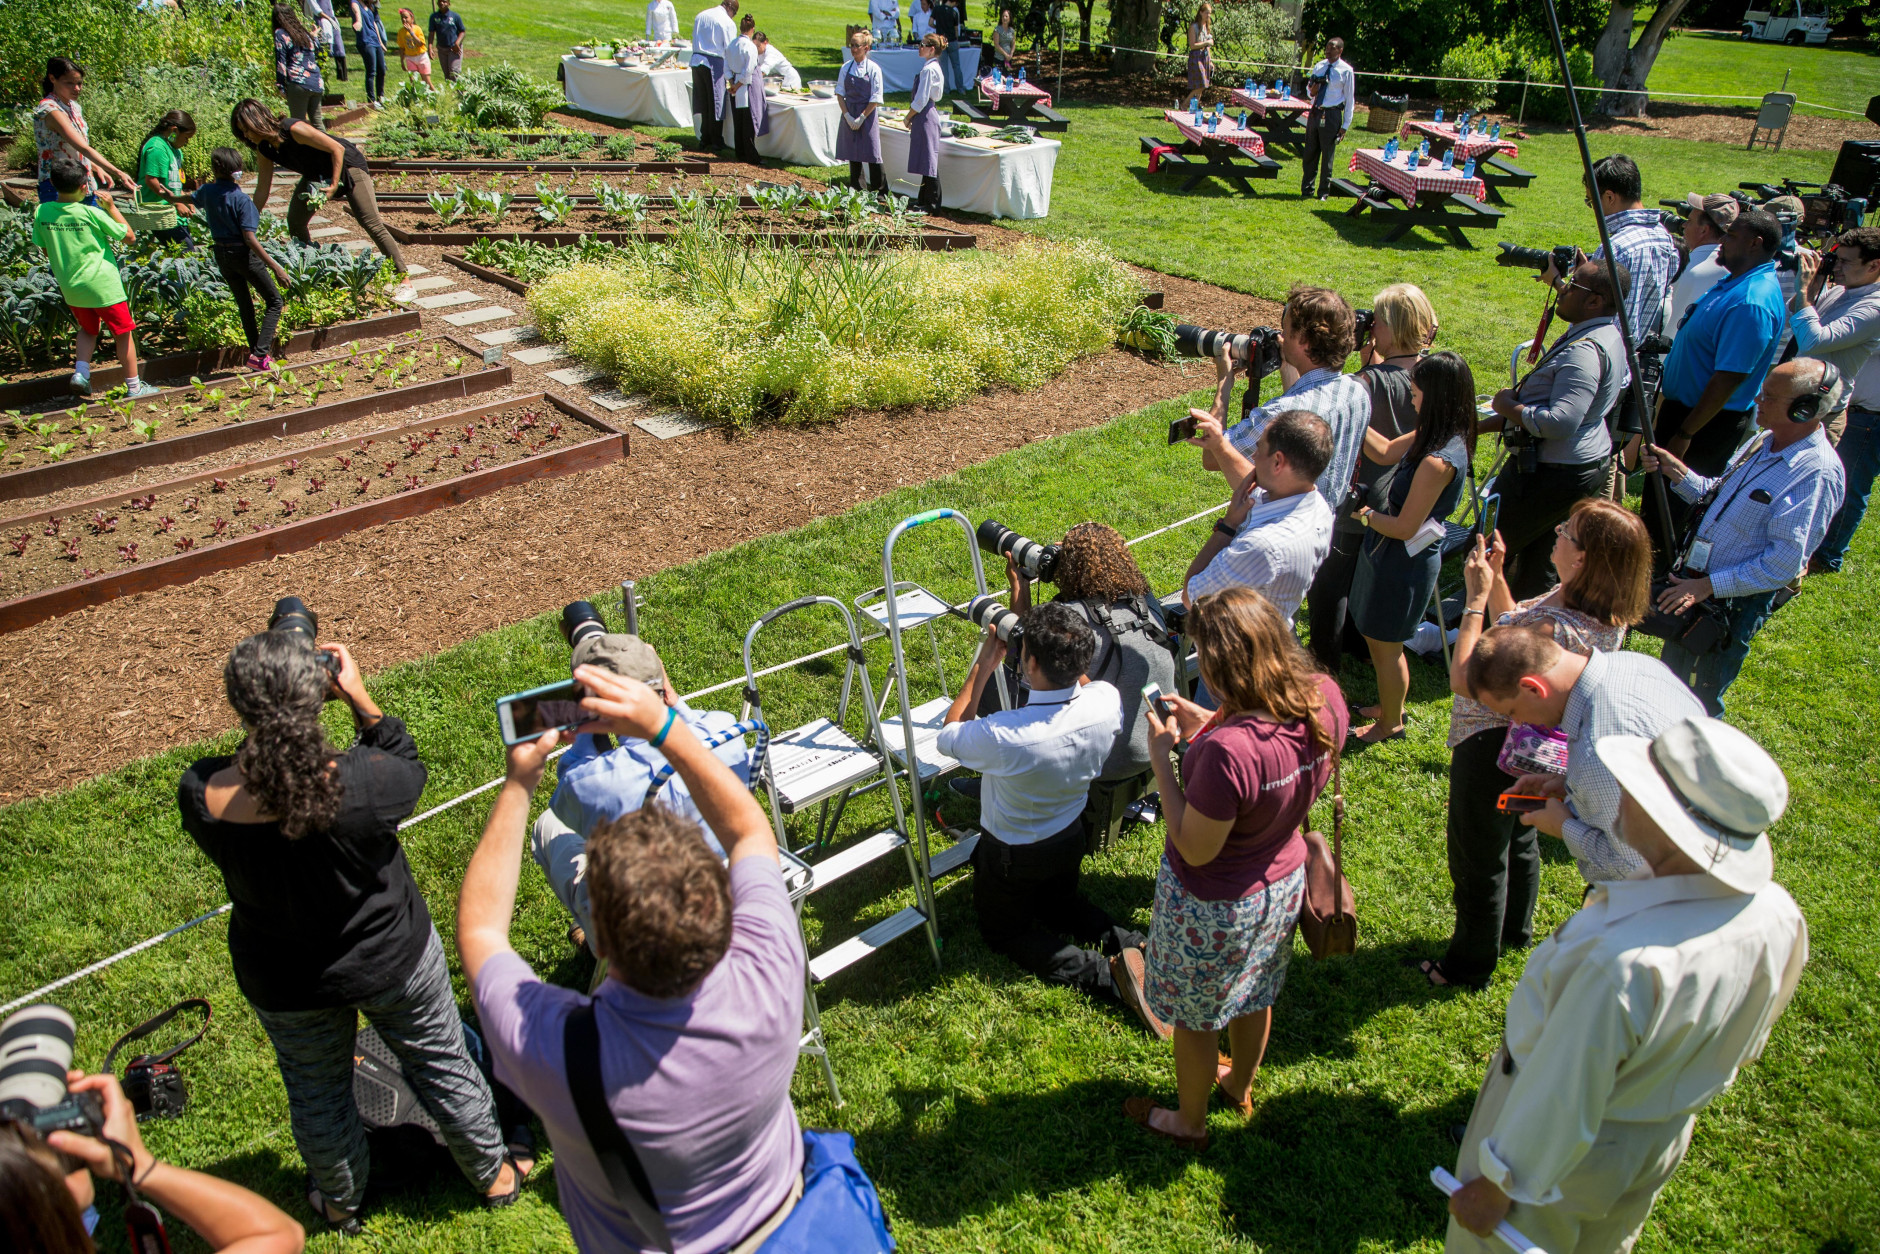 First lady Michelle Obama, at top left, joined by school children from across the country, harvest the White House Kitchen Garden, Monday, June 6, 2016, at the White House in Washington. (AP Photo/Andrew Harnik)